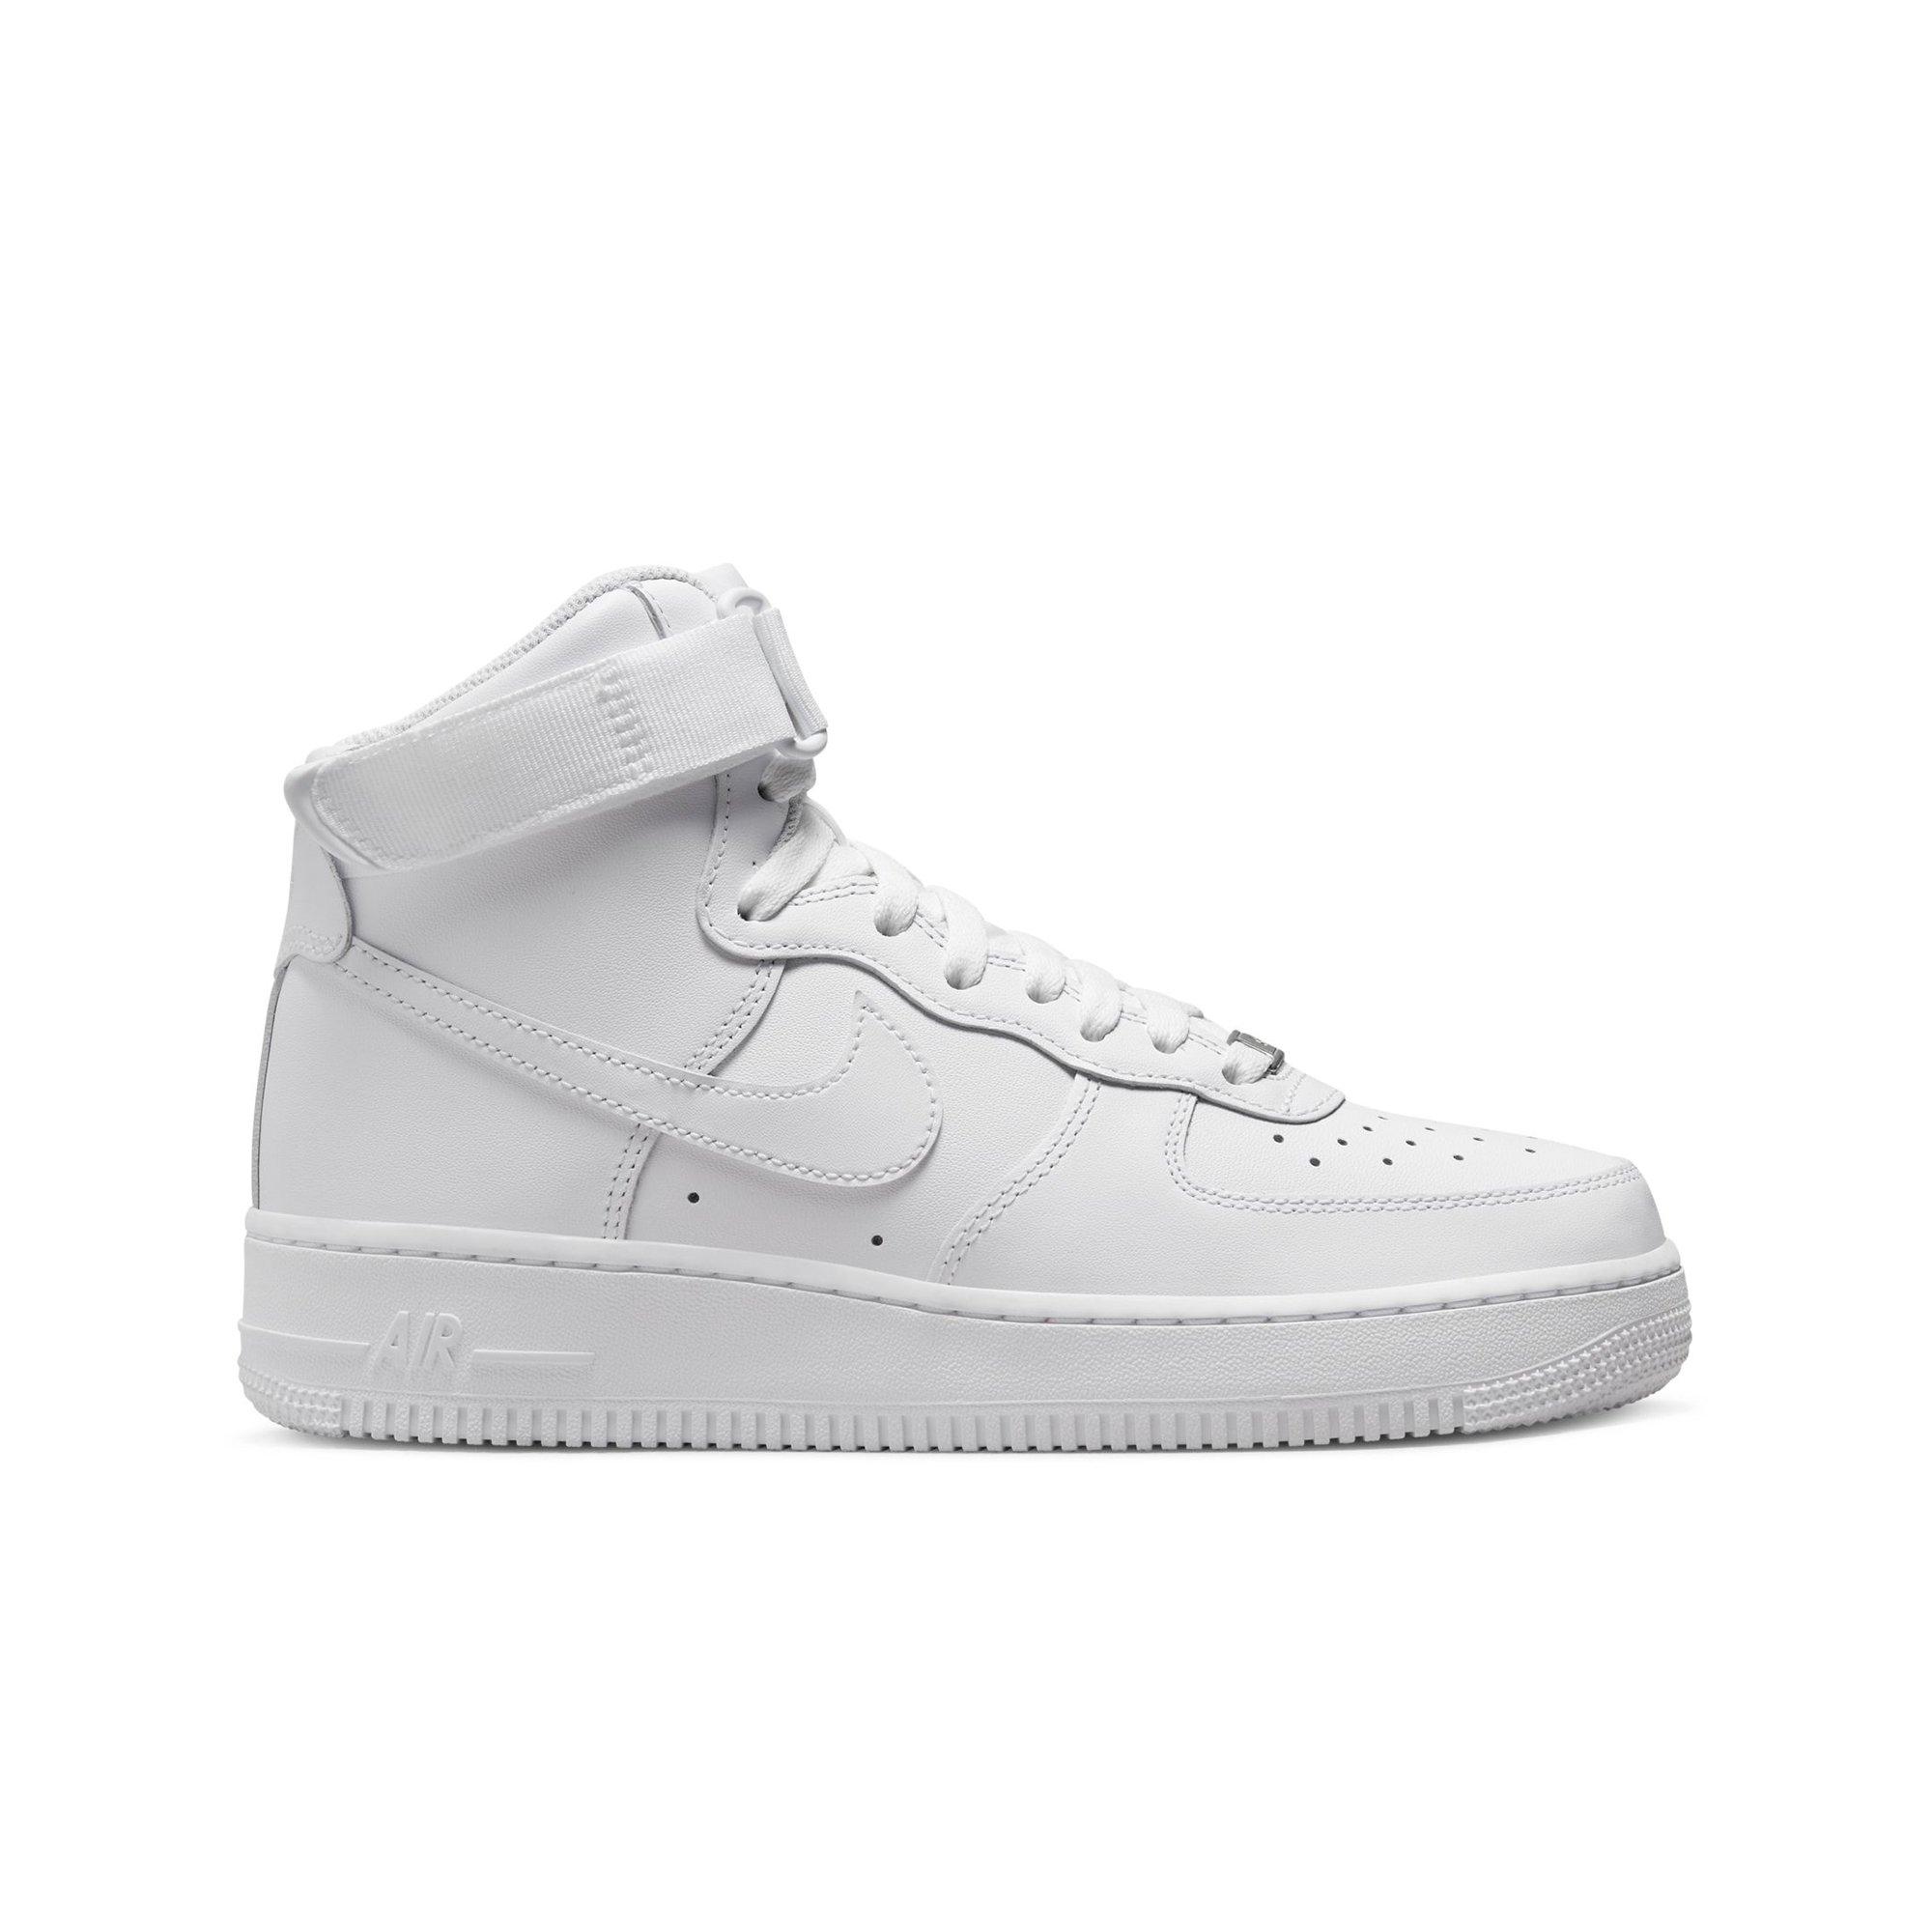 Nike, Shoes, Air Force High Tops Womens Size 8